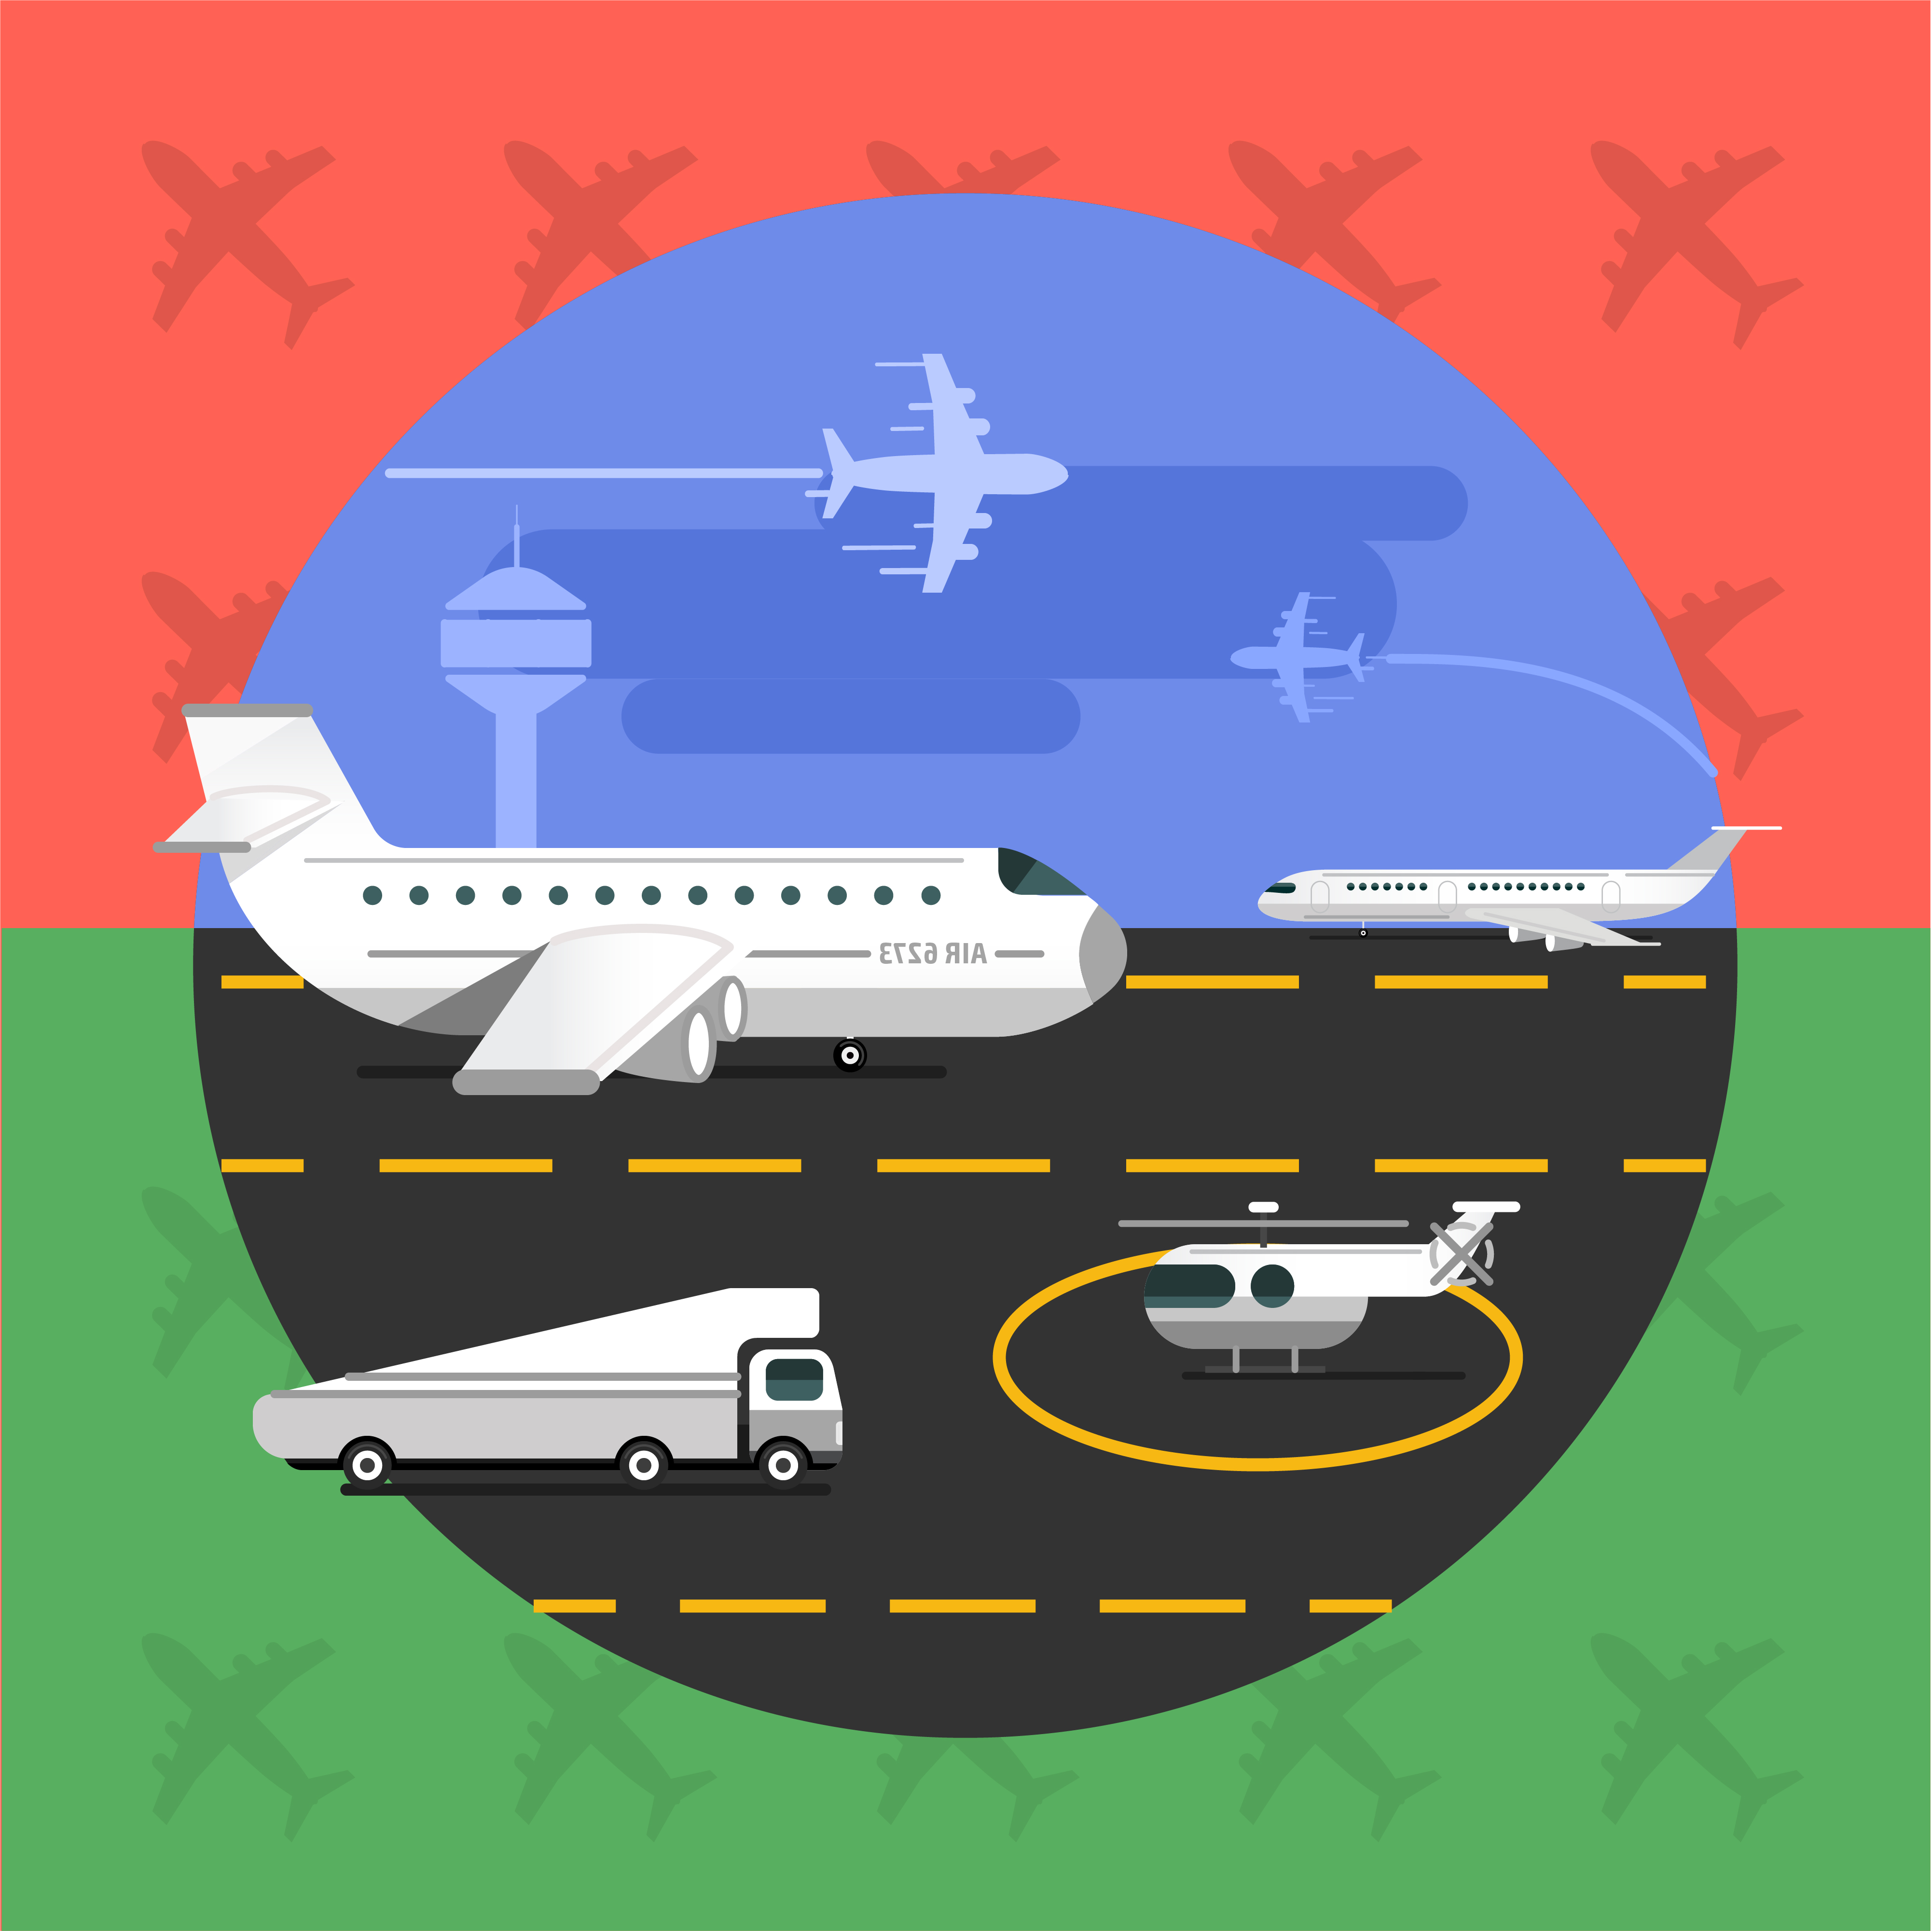 Free vector illustration of airport with planes - travel Photoshop brush